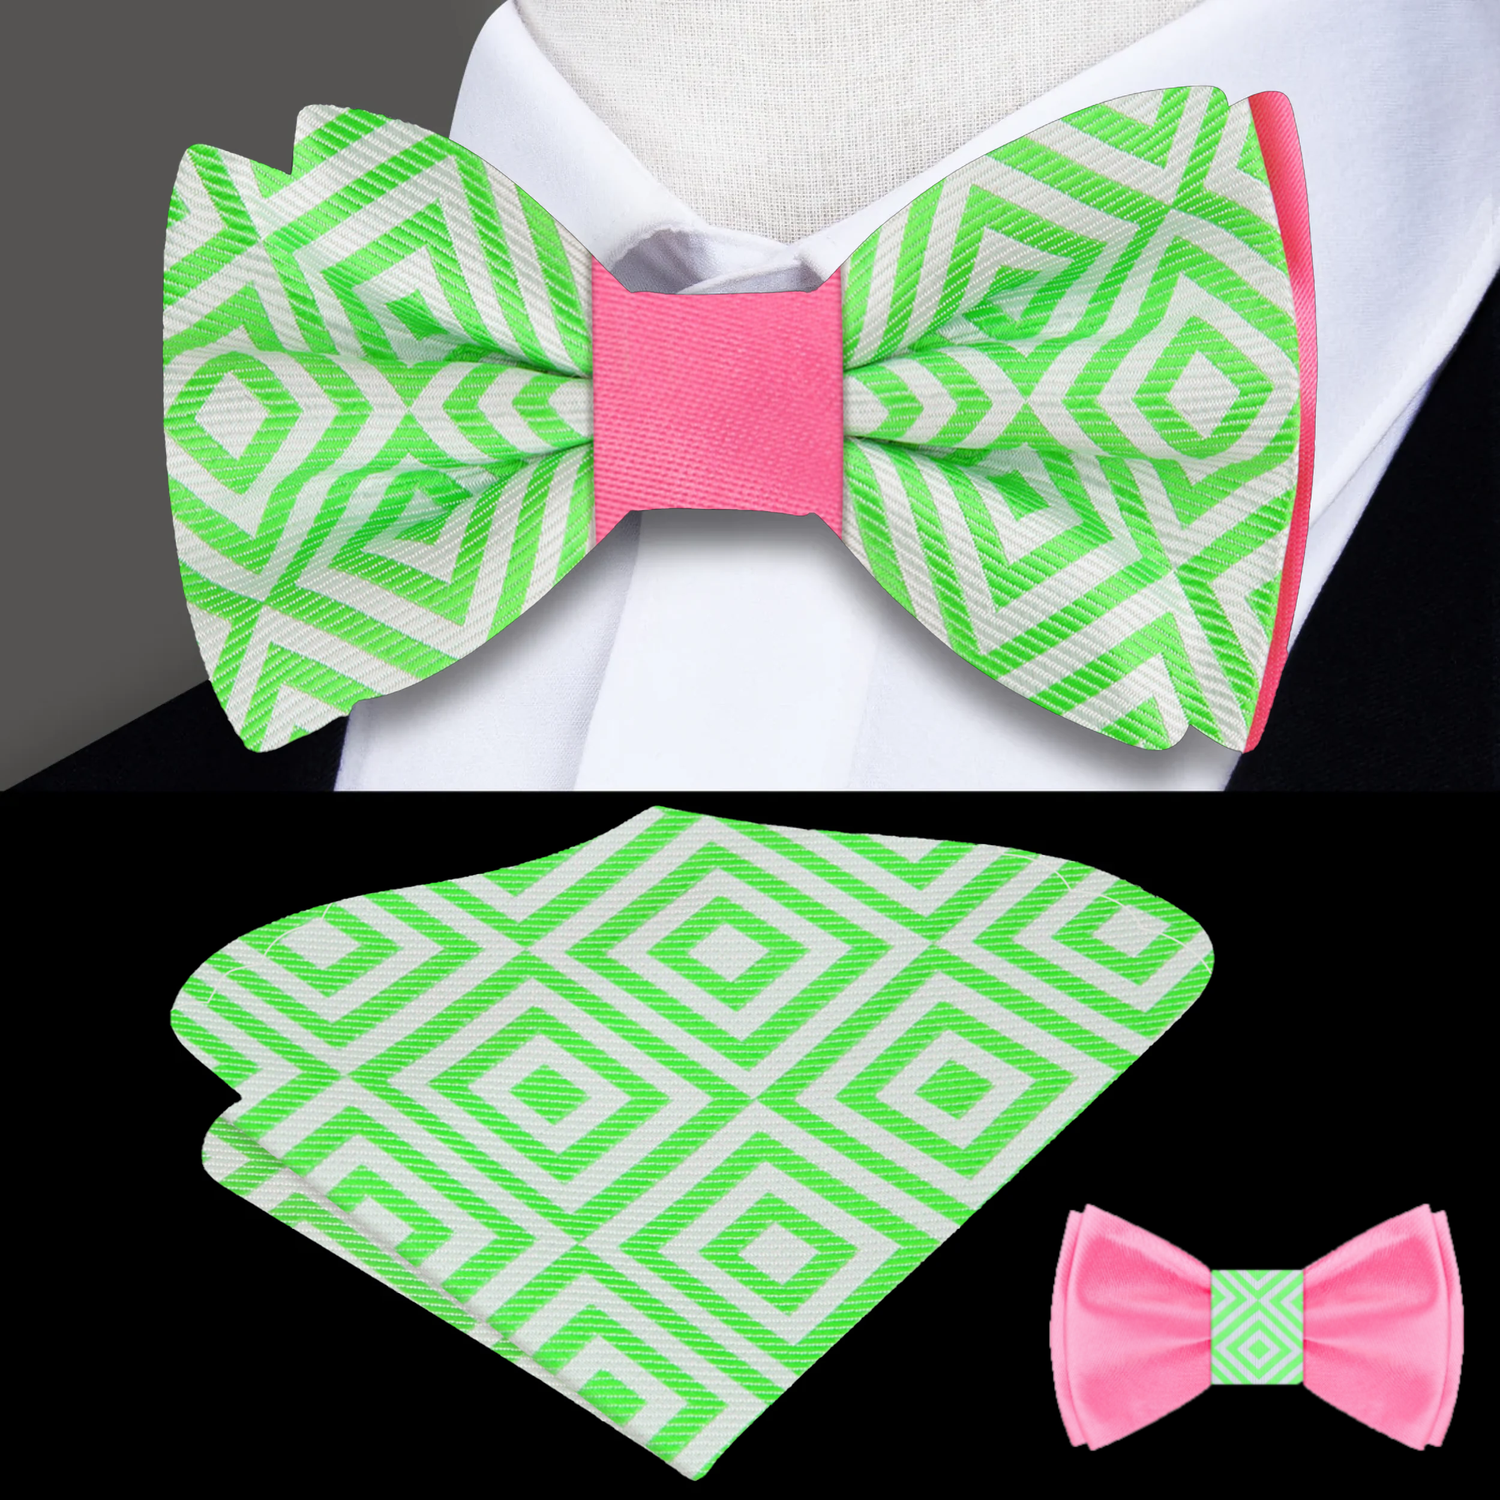 Main: Green, White, Pink Geometric Bow Tie and Pocket Square